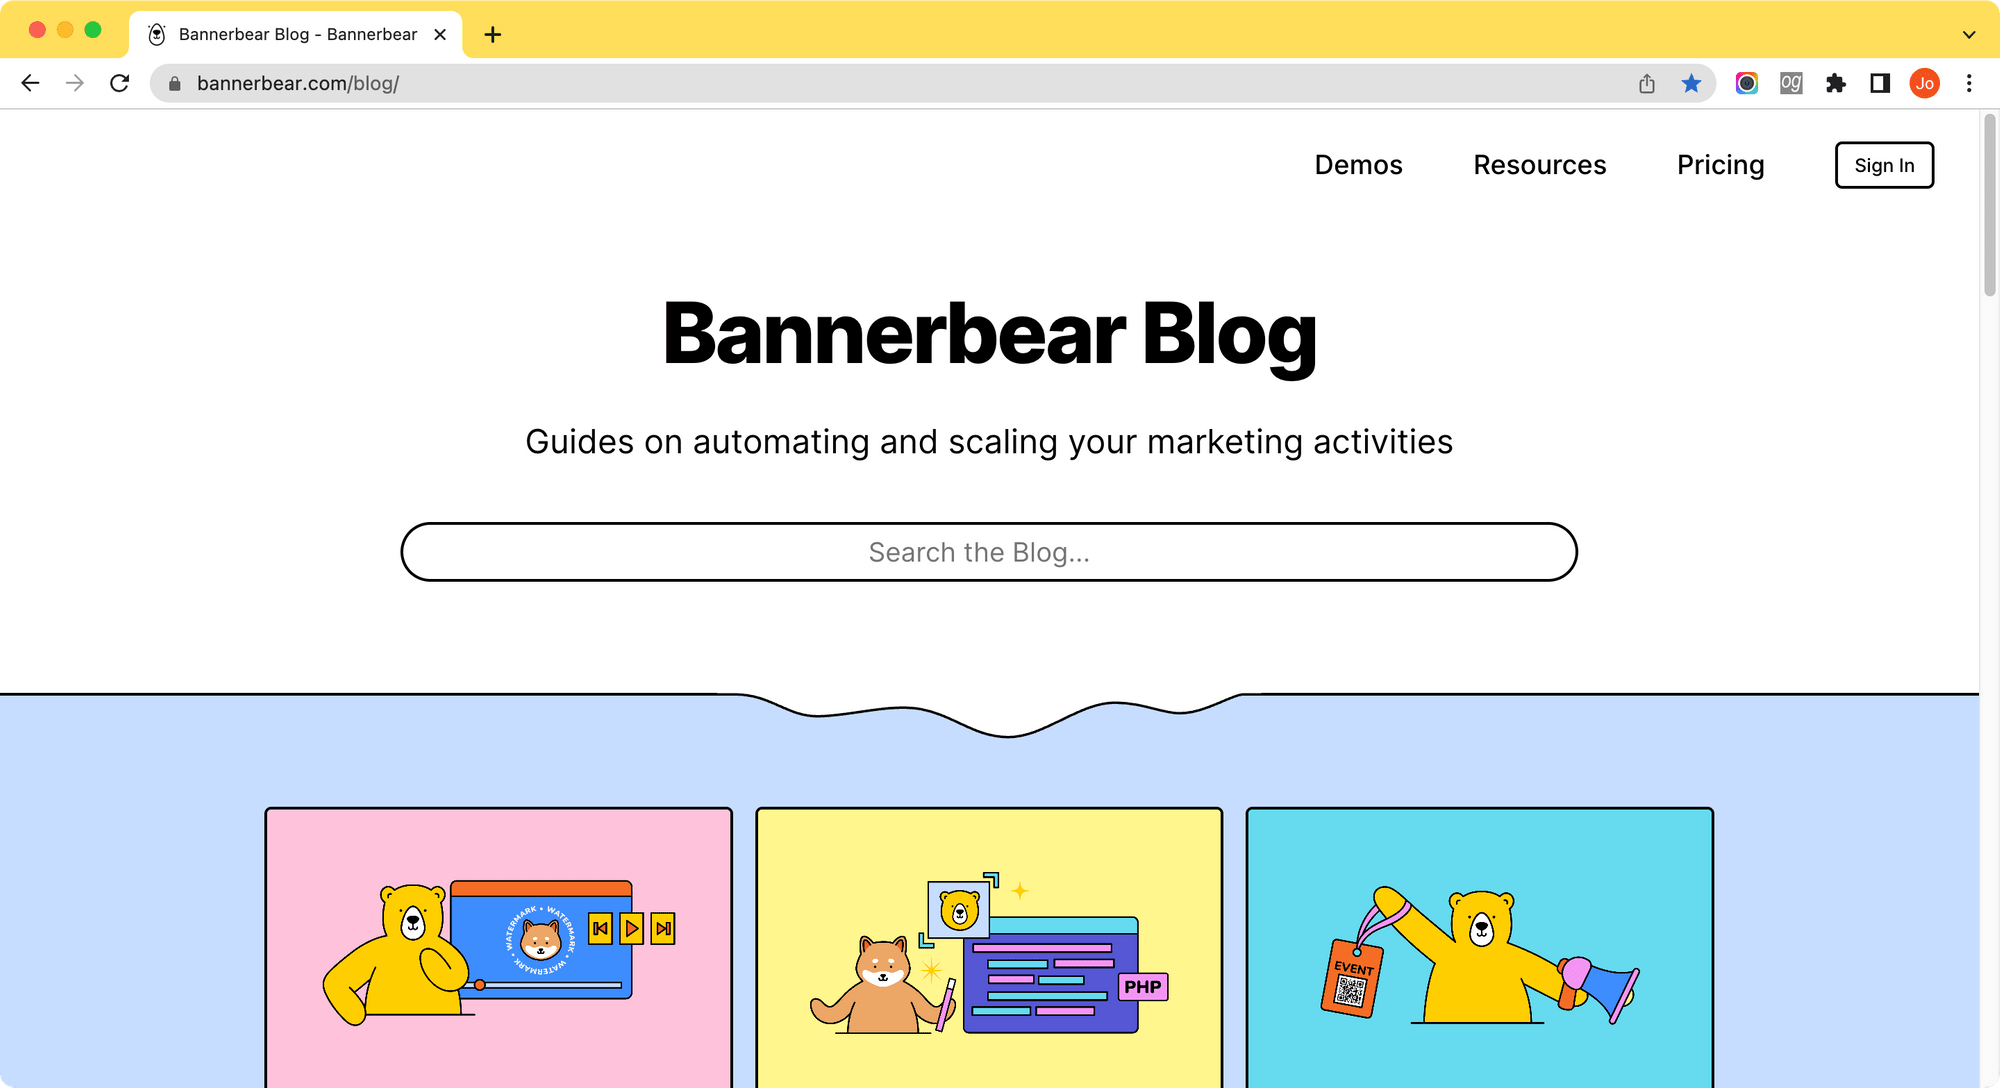 a screenshot of Bannerbear Blog with the logo and "Product" removed from the top navigation bar